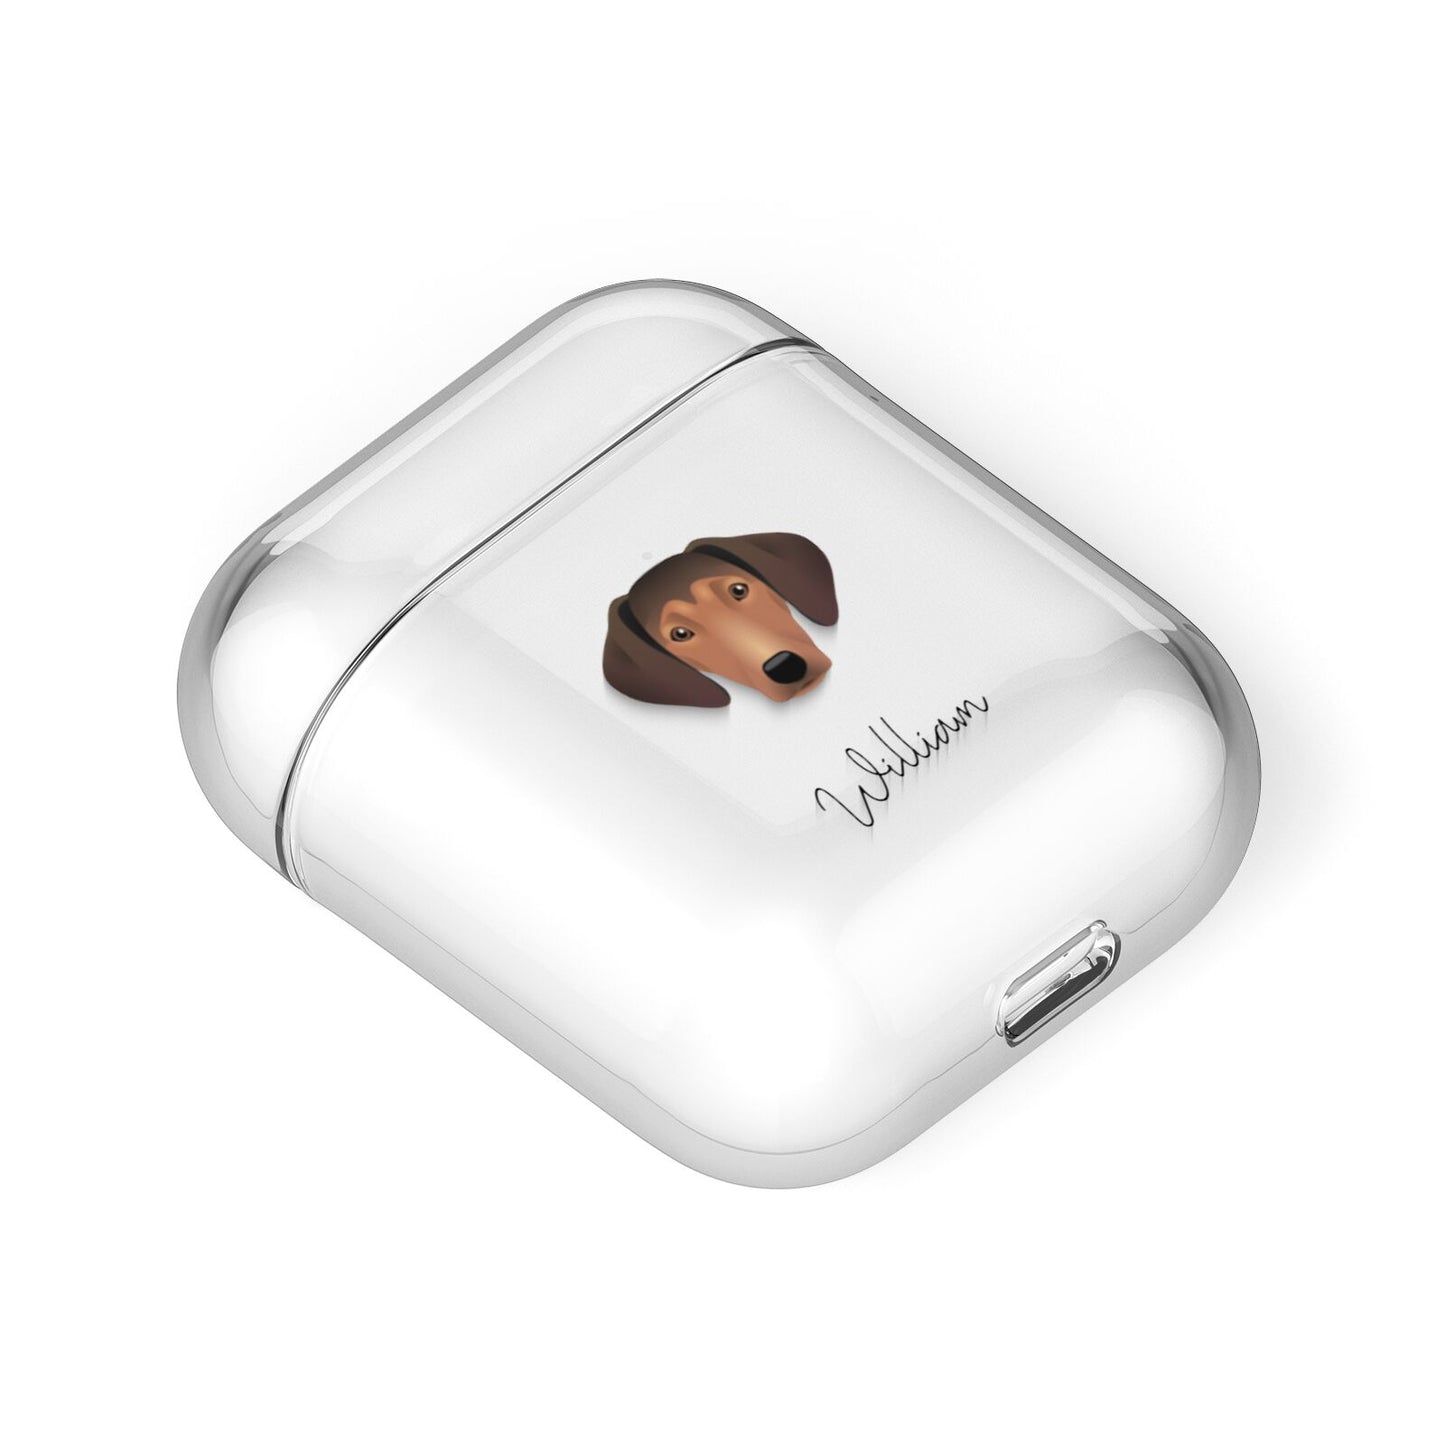 Greek Harehound Personalised AirPods Case Laid Flat